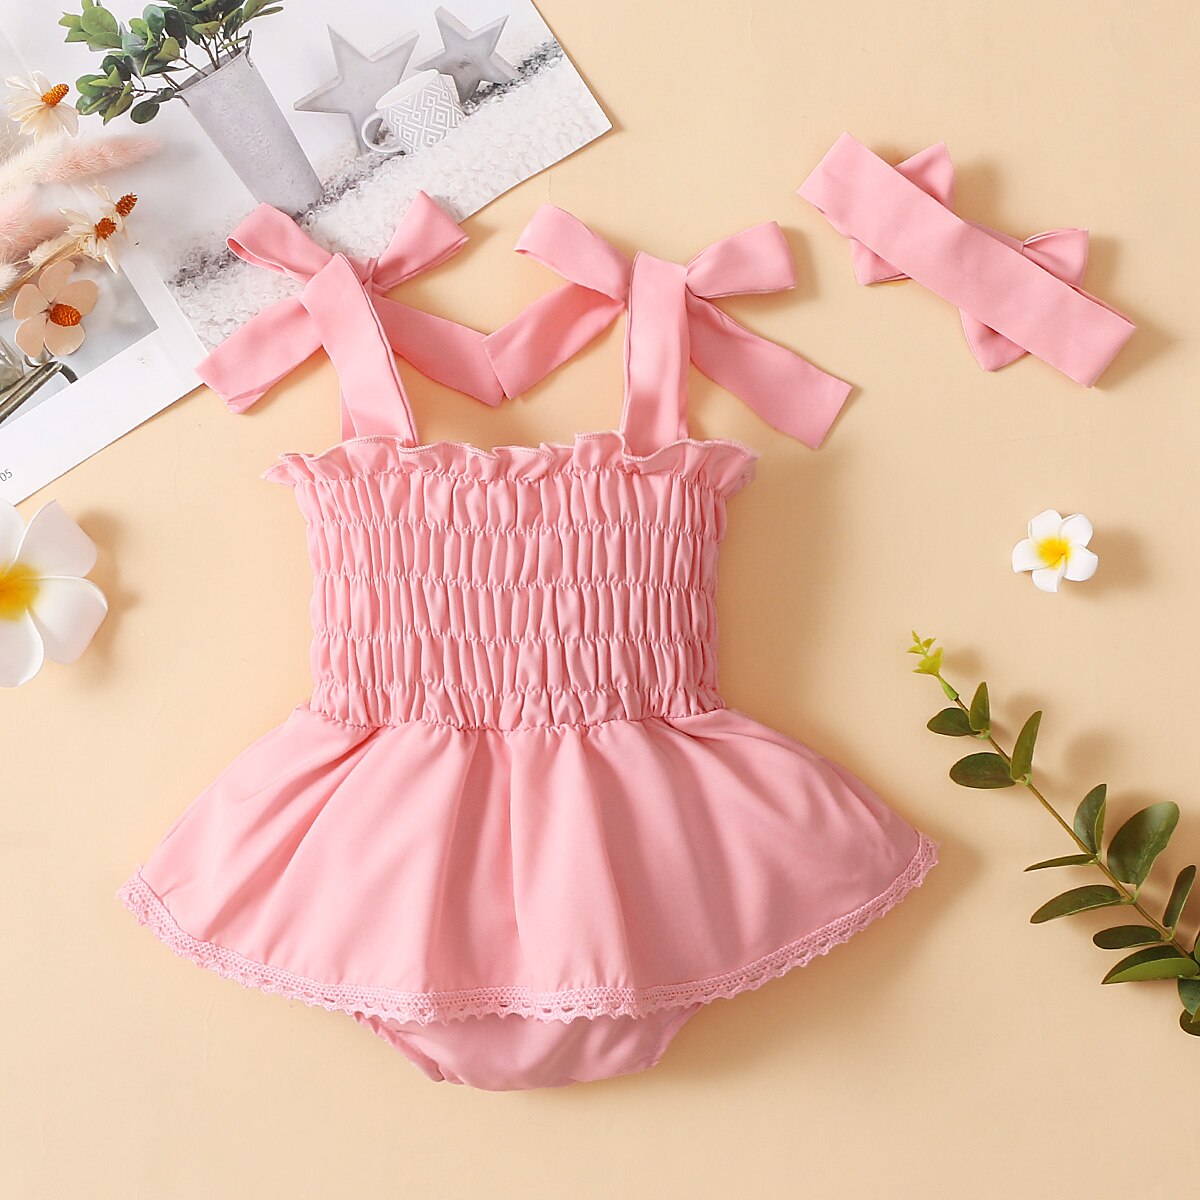 Infant-Newborn-Baby-Girls-Bodysuits-Dress-Elastic-Solid-Bowknot-Strap-Jumpsuit-Summer-Outfits-Tutu-Outfits-With-2